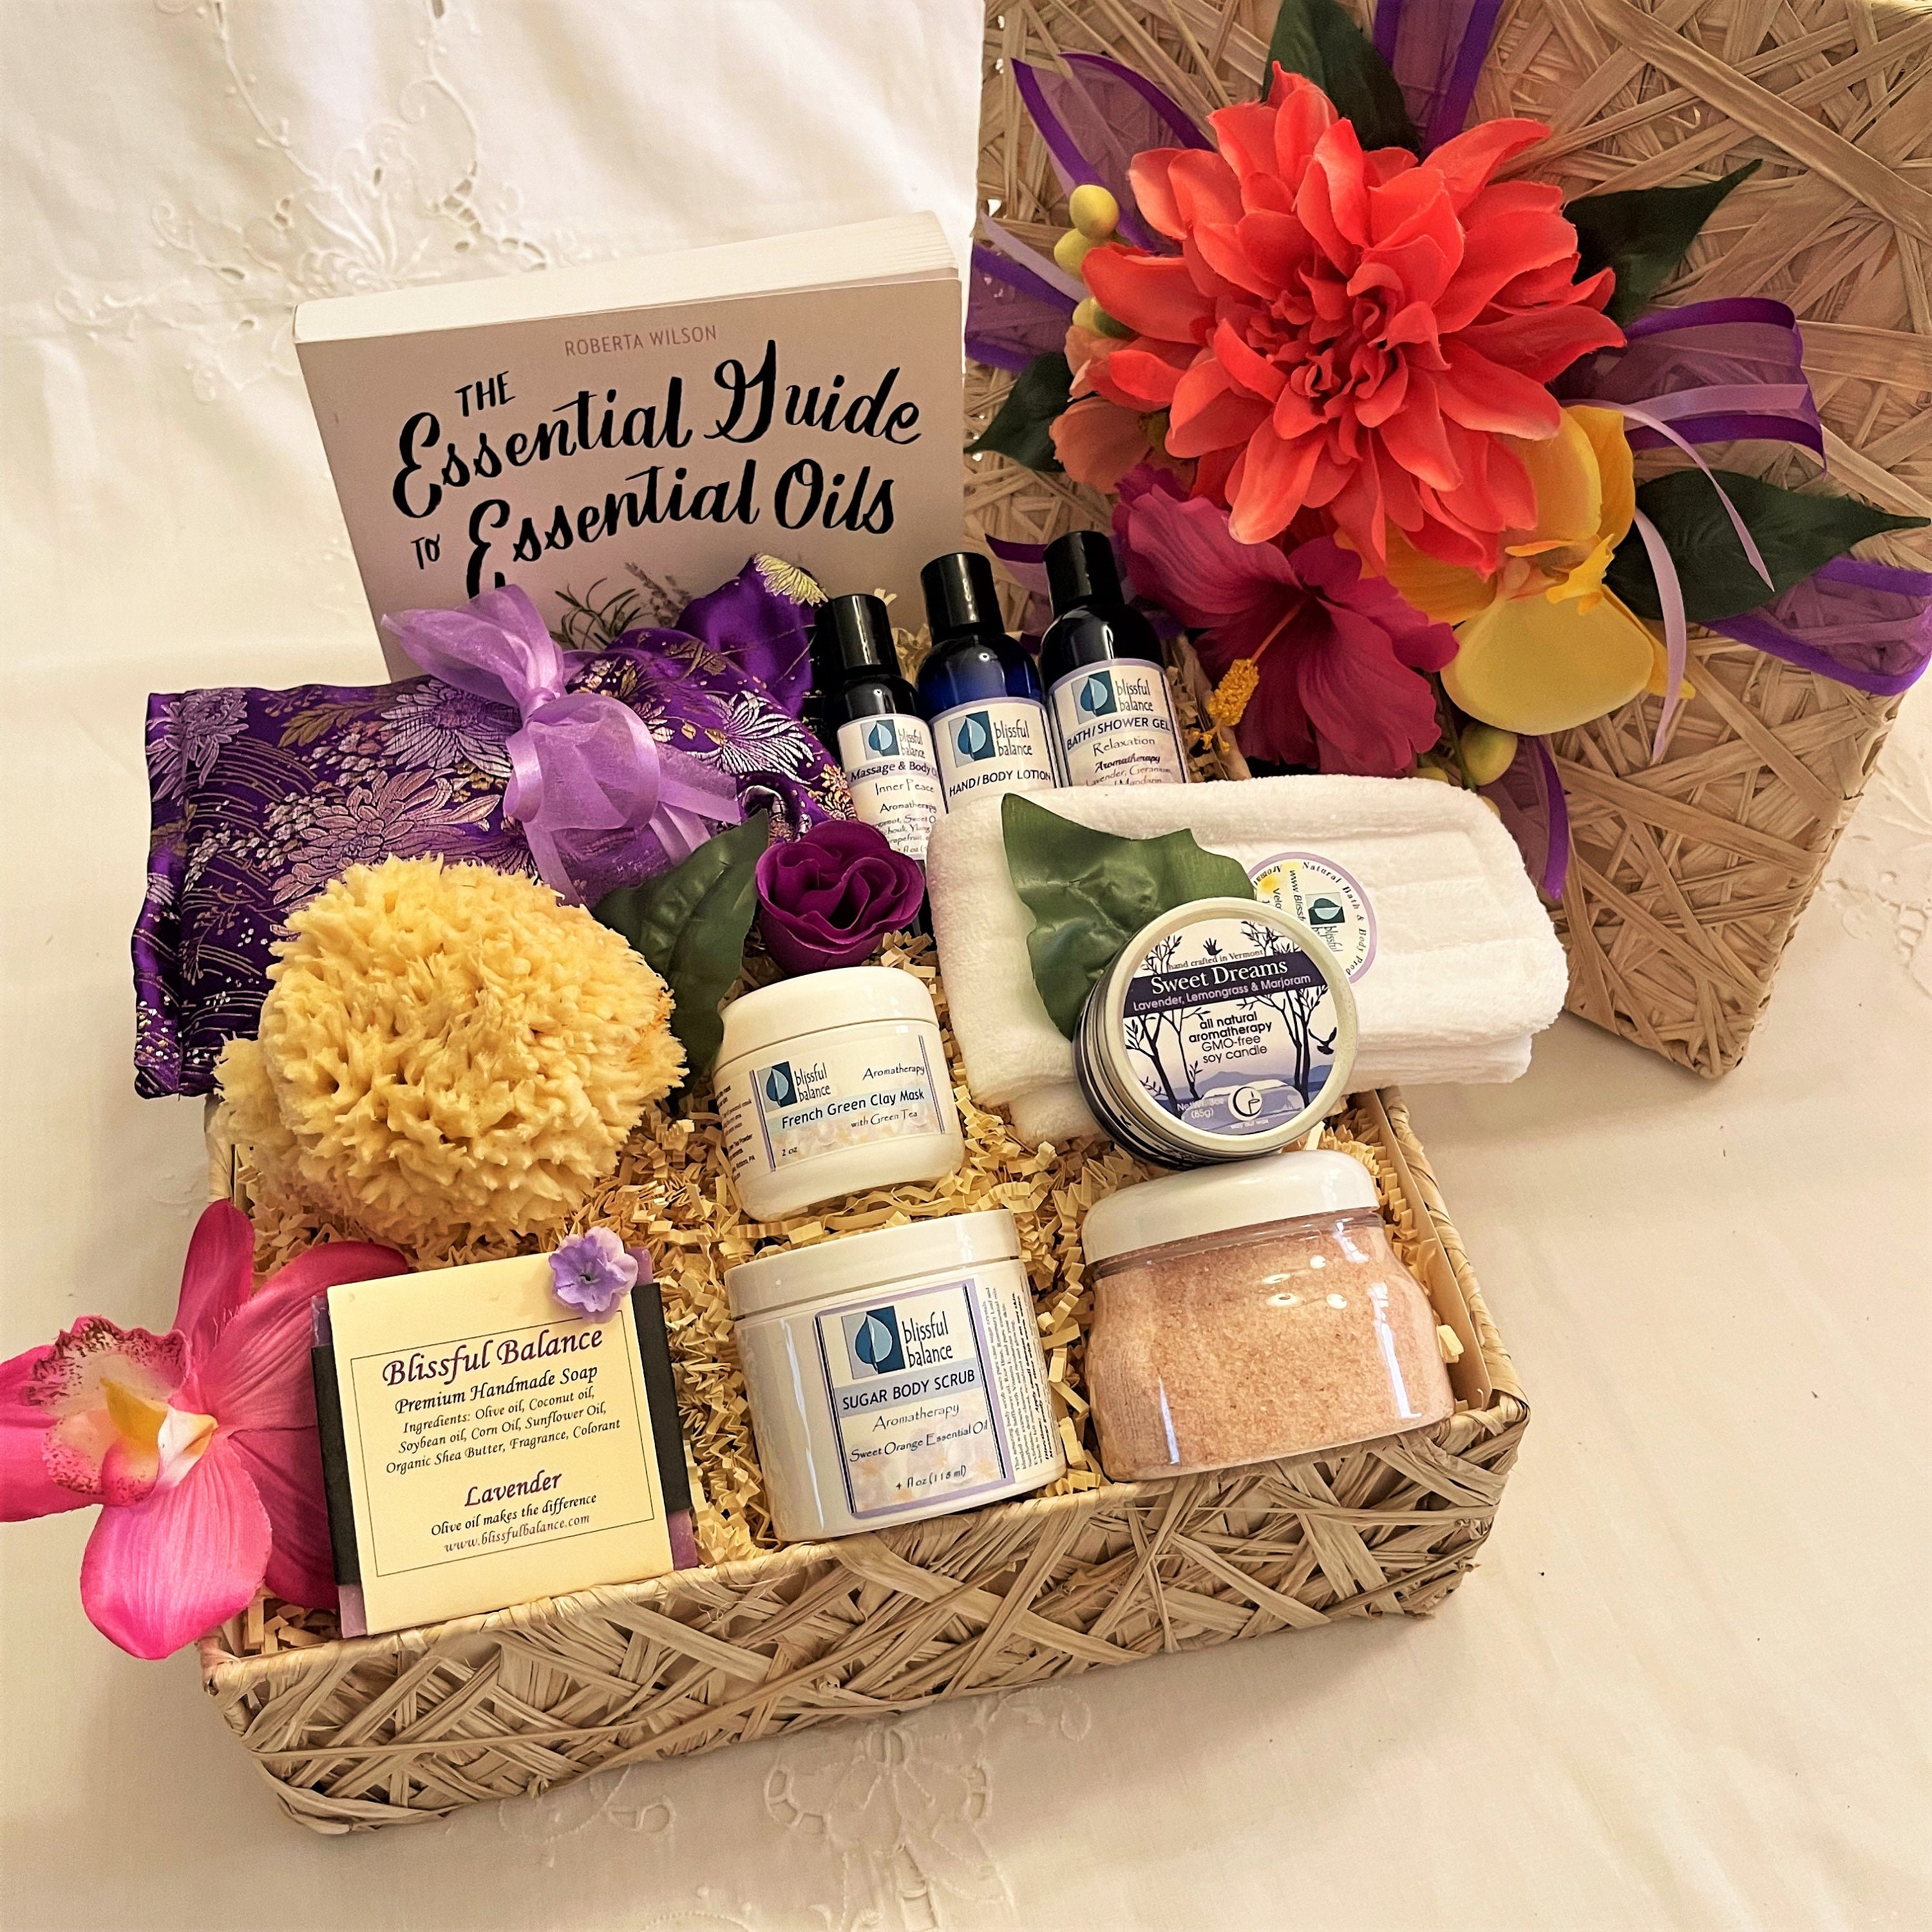 Gifts for Women, Mom - Relaxing Spa Gift Basket for Birthday, Gifts for  Women, Mothers Day, Valentines Day, Christmas, Unique Gift ideas for  Sister